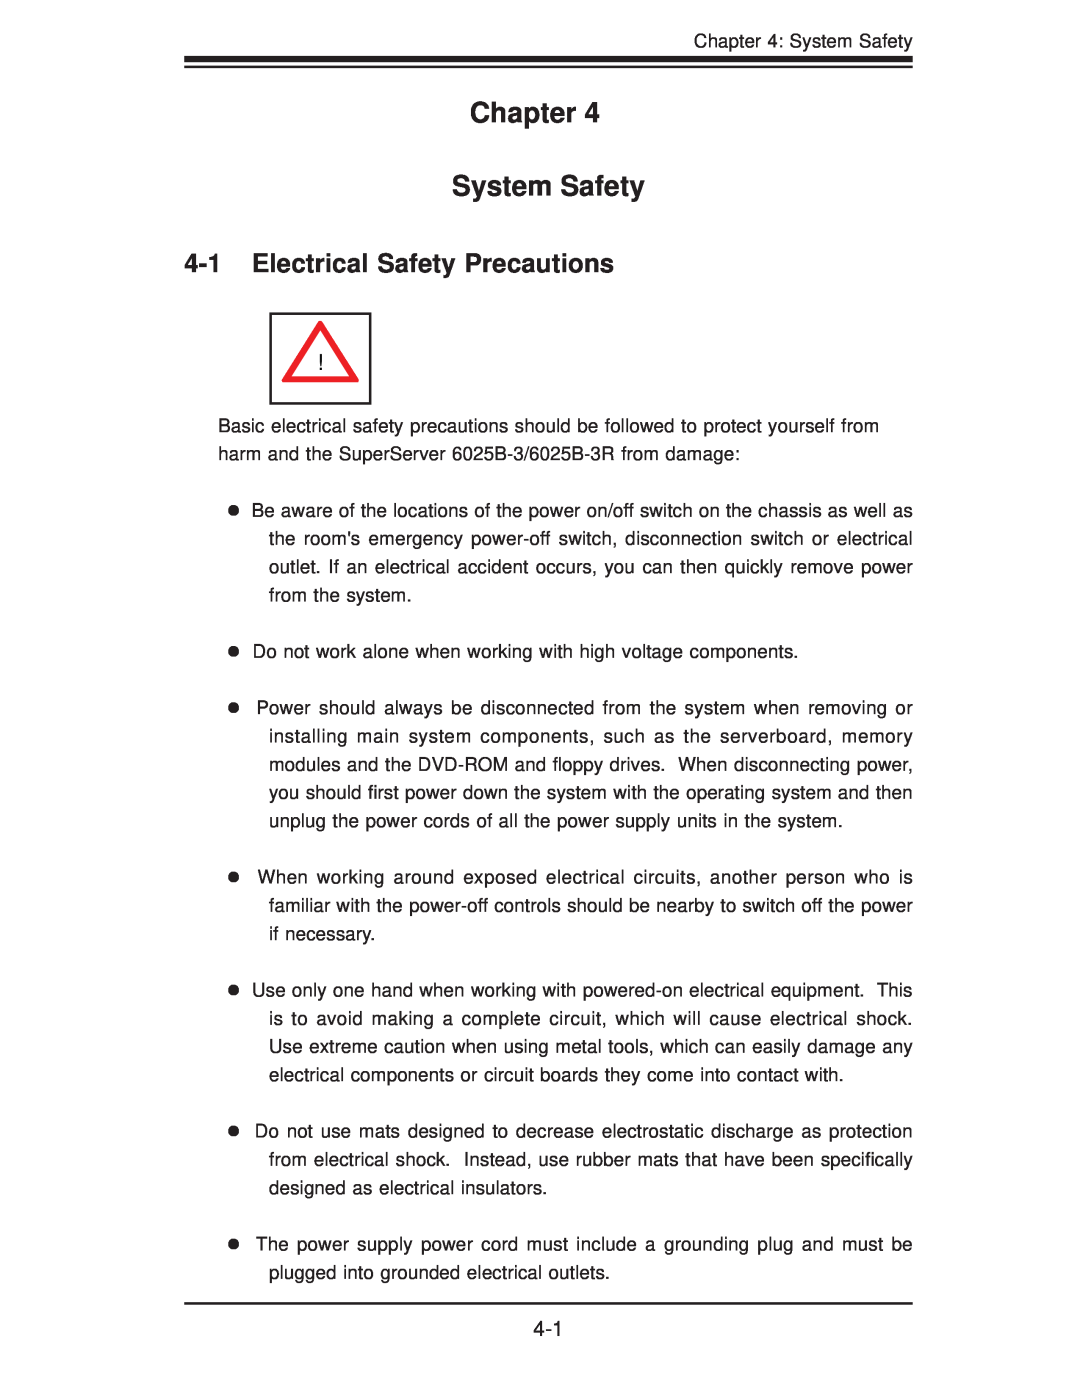 SUPER MICRO Computer 6025B-3R user manual Chapter System Safety, Electrical Safety Precautions 